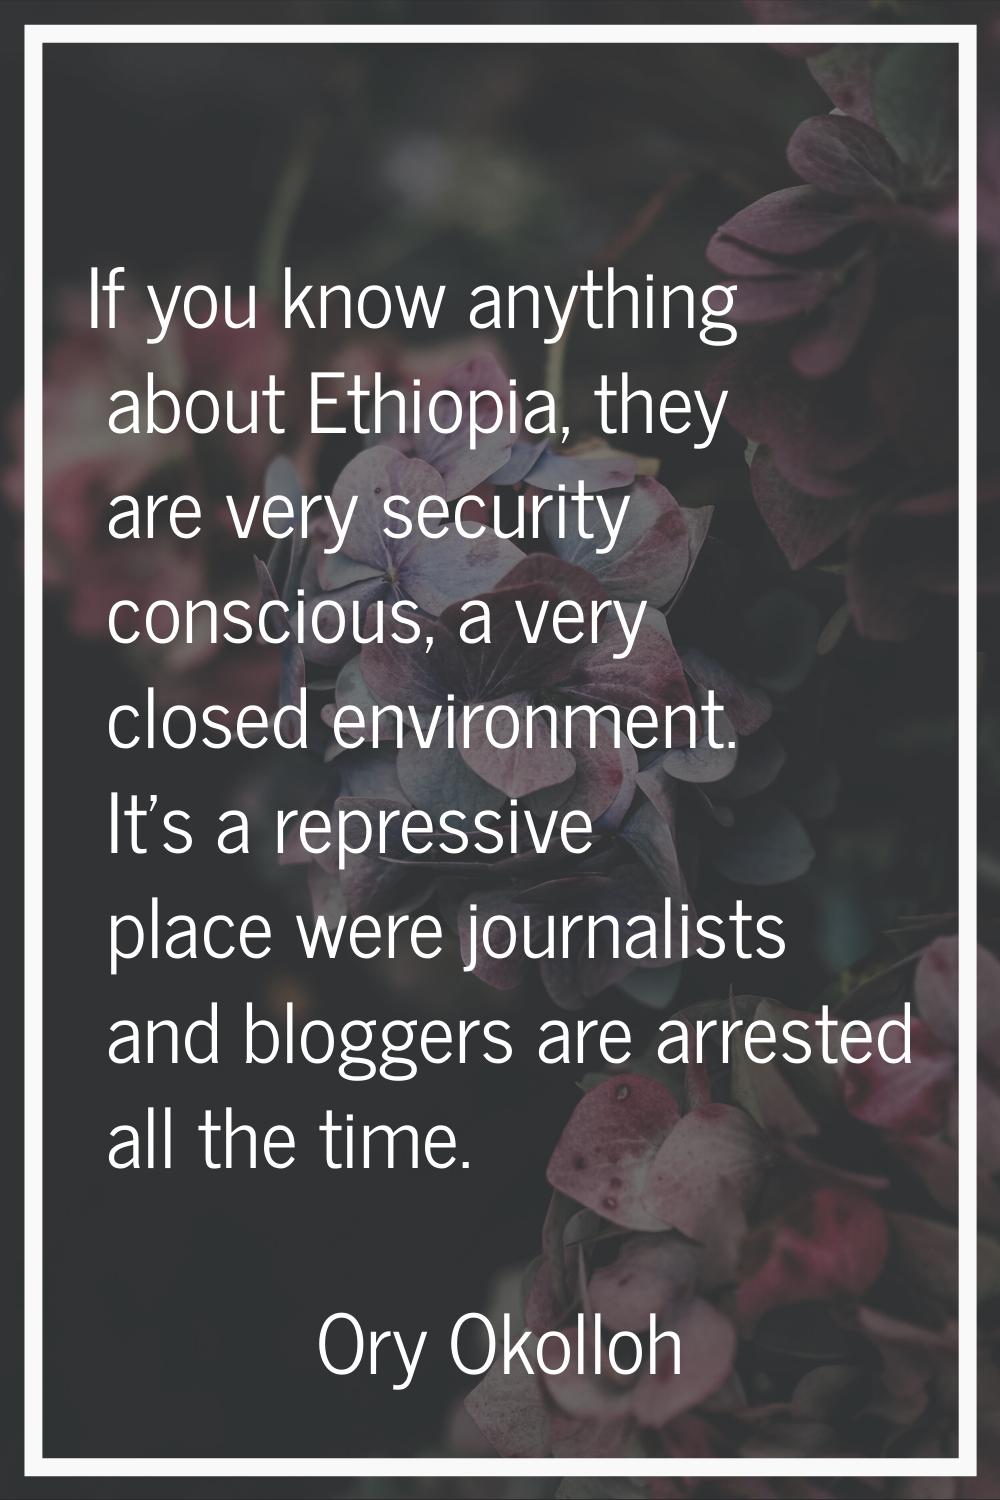 If you know anything about Ethiopia, they are very security conscious, a very closed environment. I